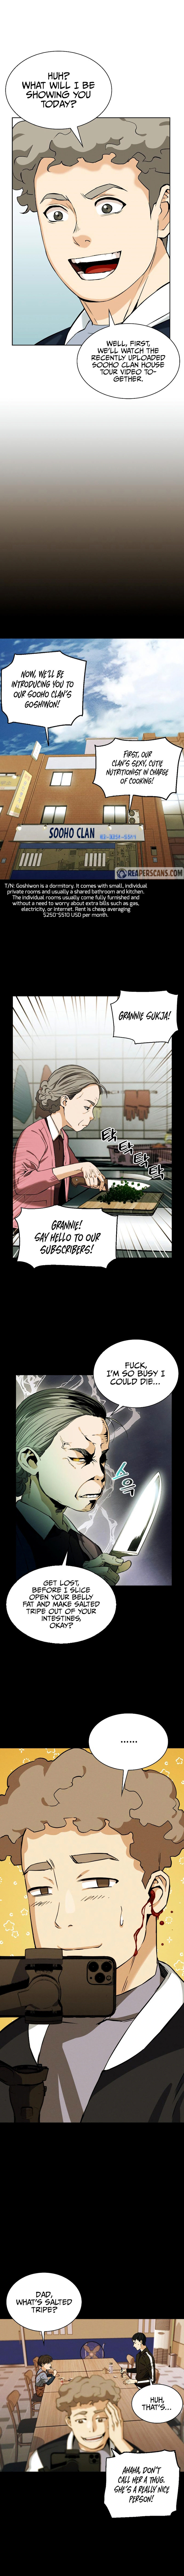 Seoul Station Druid - Chapter 19 Page 9